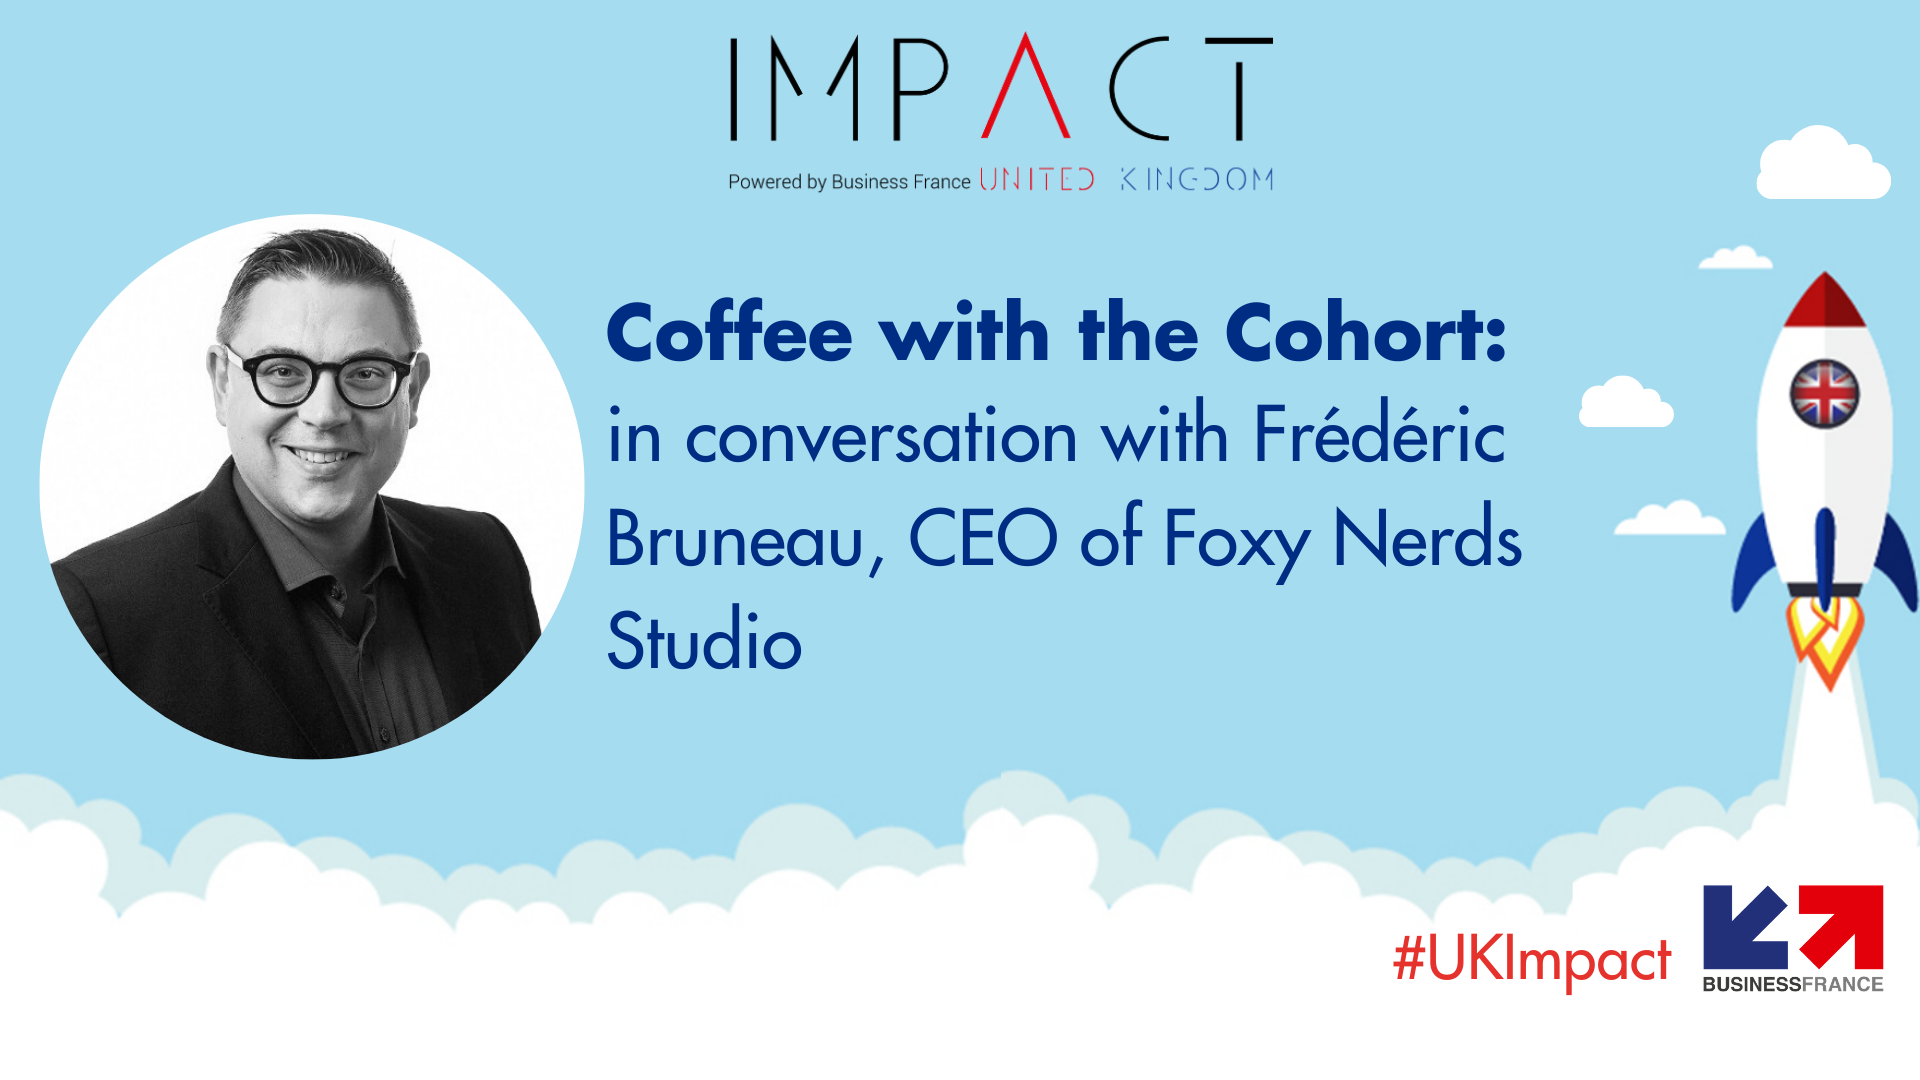 Coffee with the Cohort: in conversation with Frédéric, CEO of Foxy Nerds